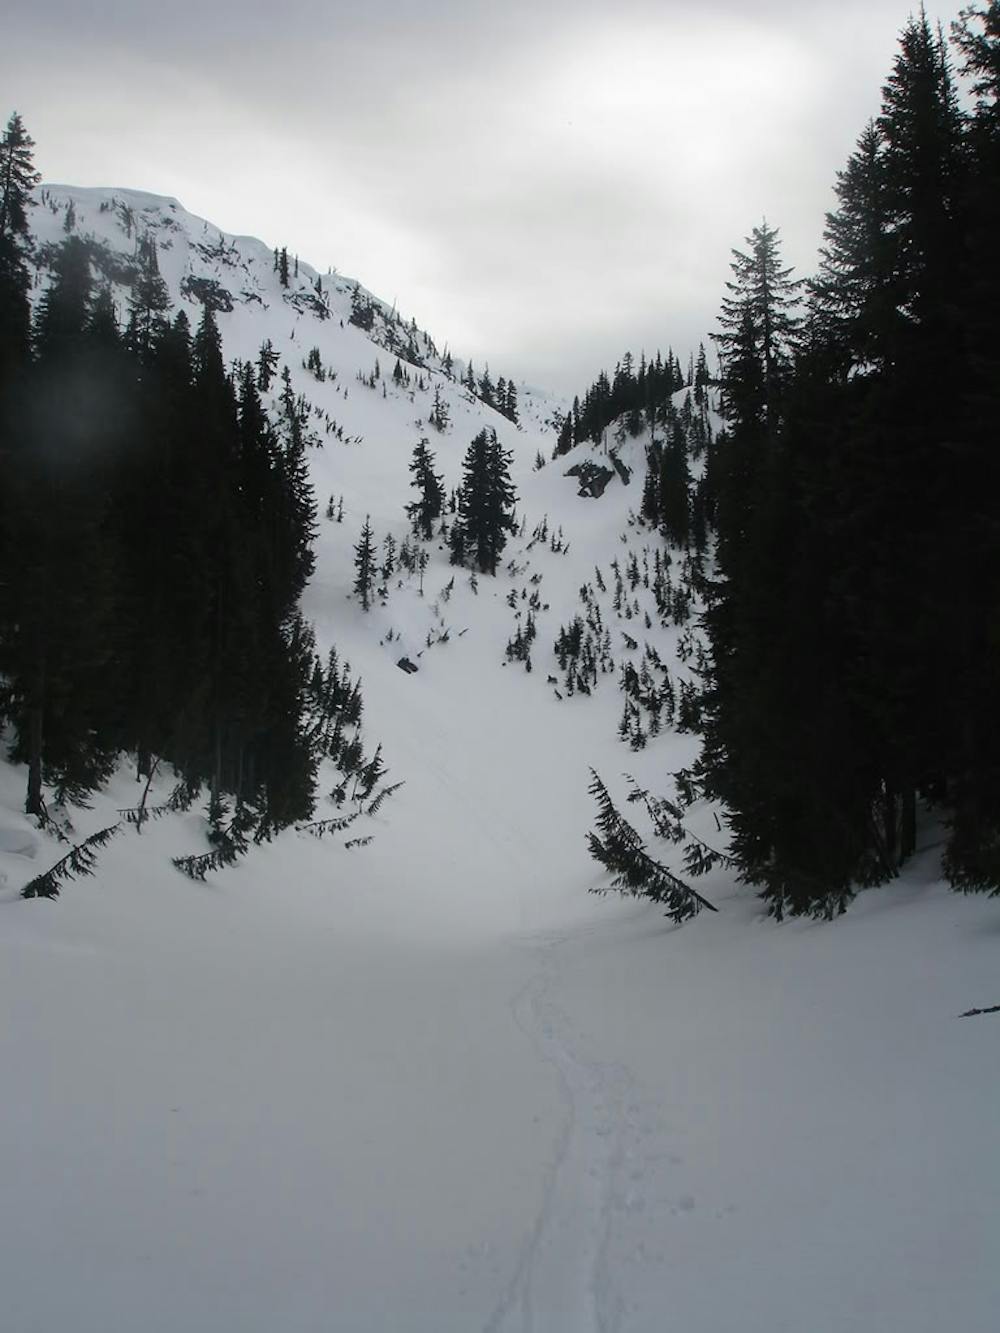 Looking back up the bowl